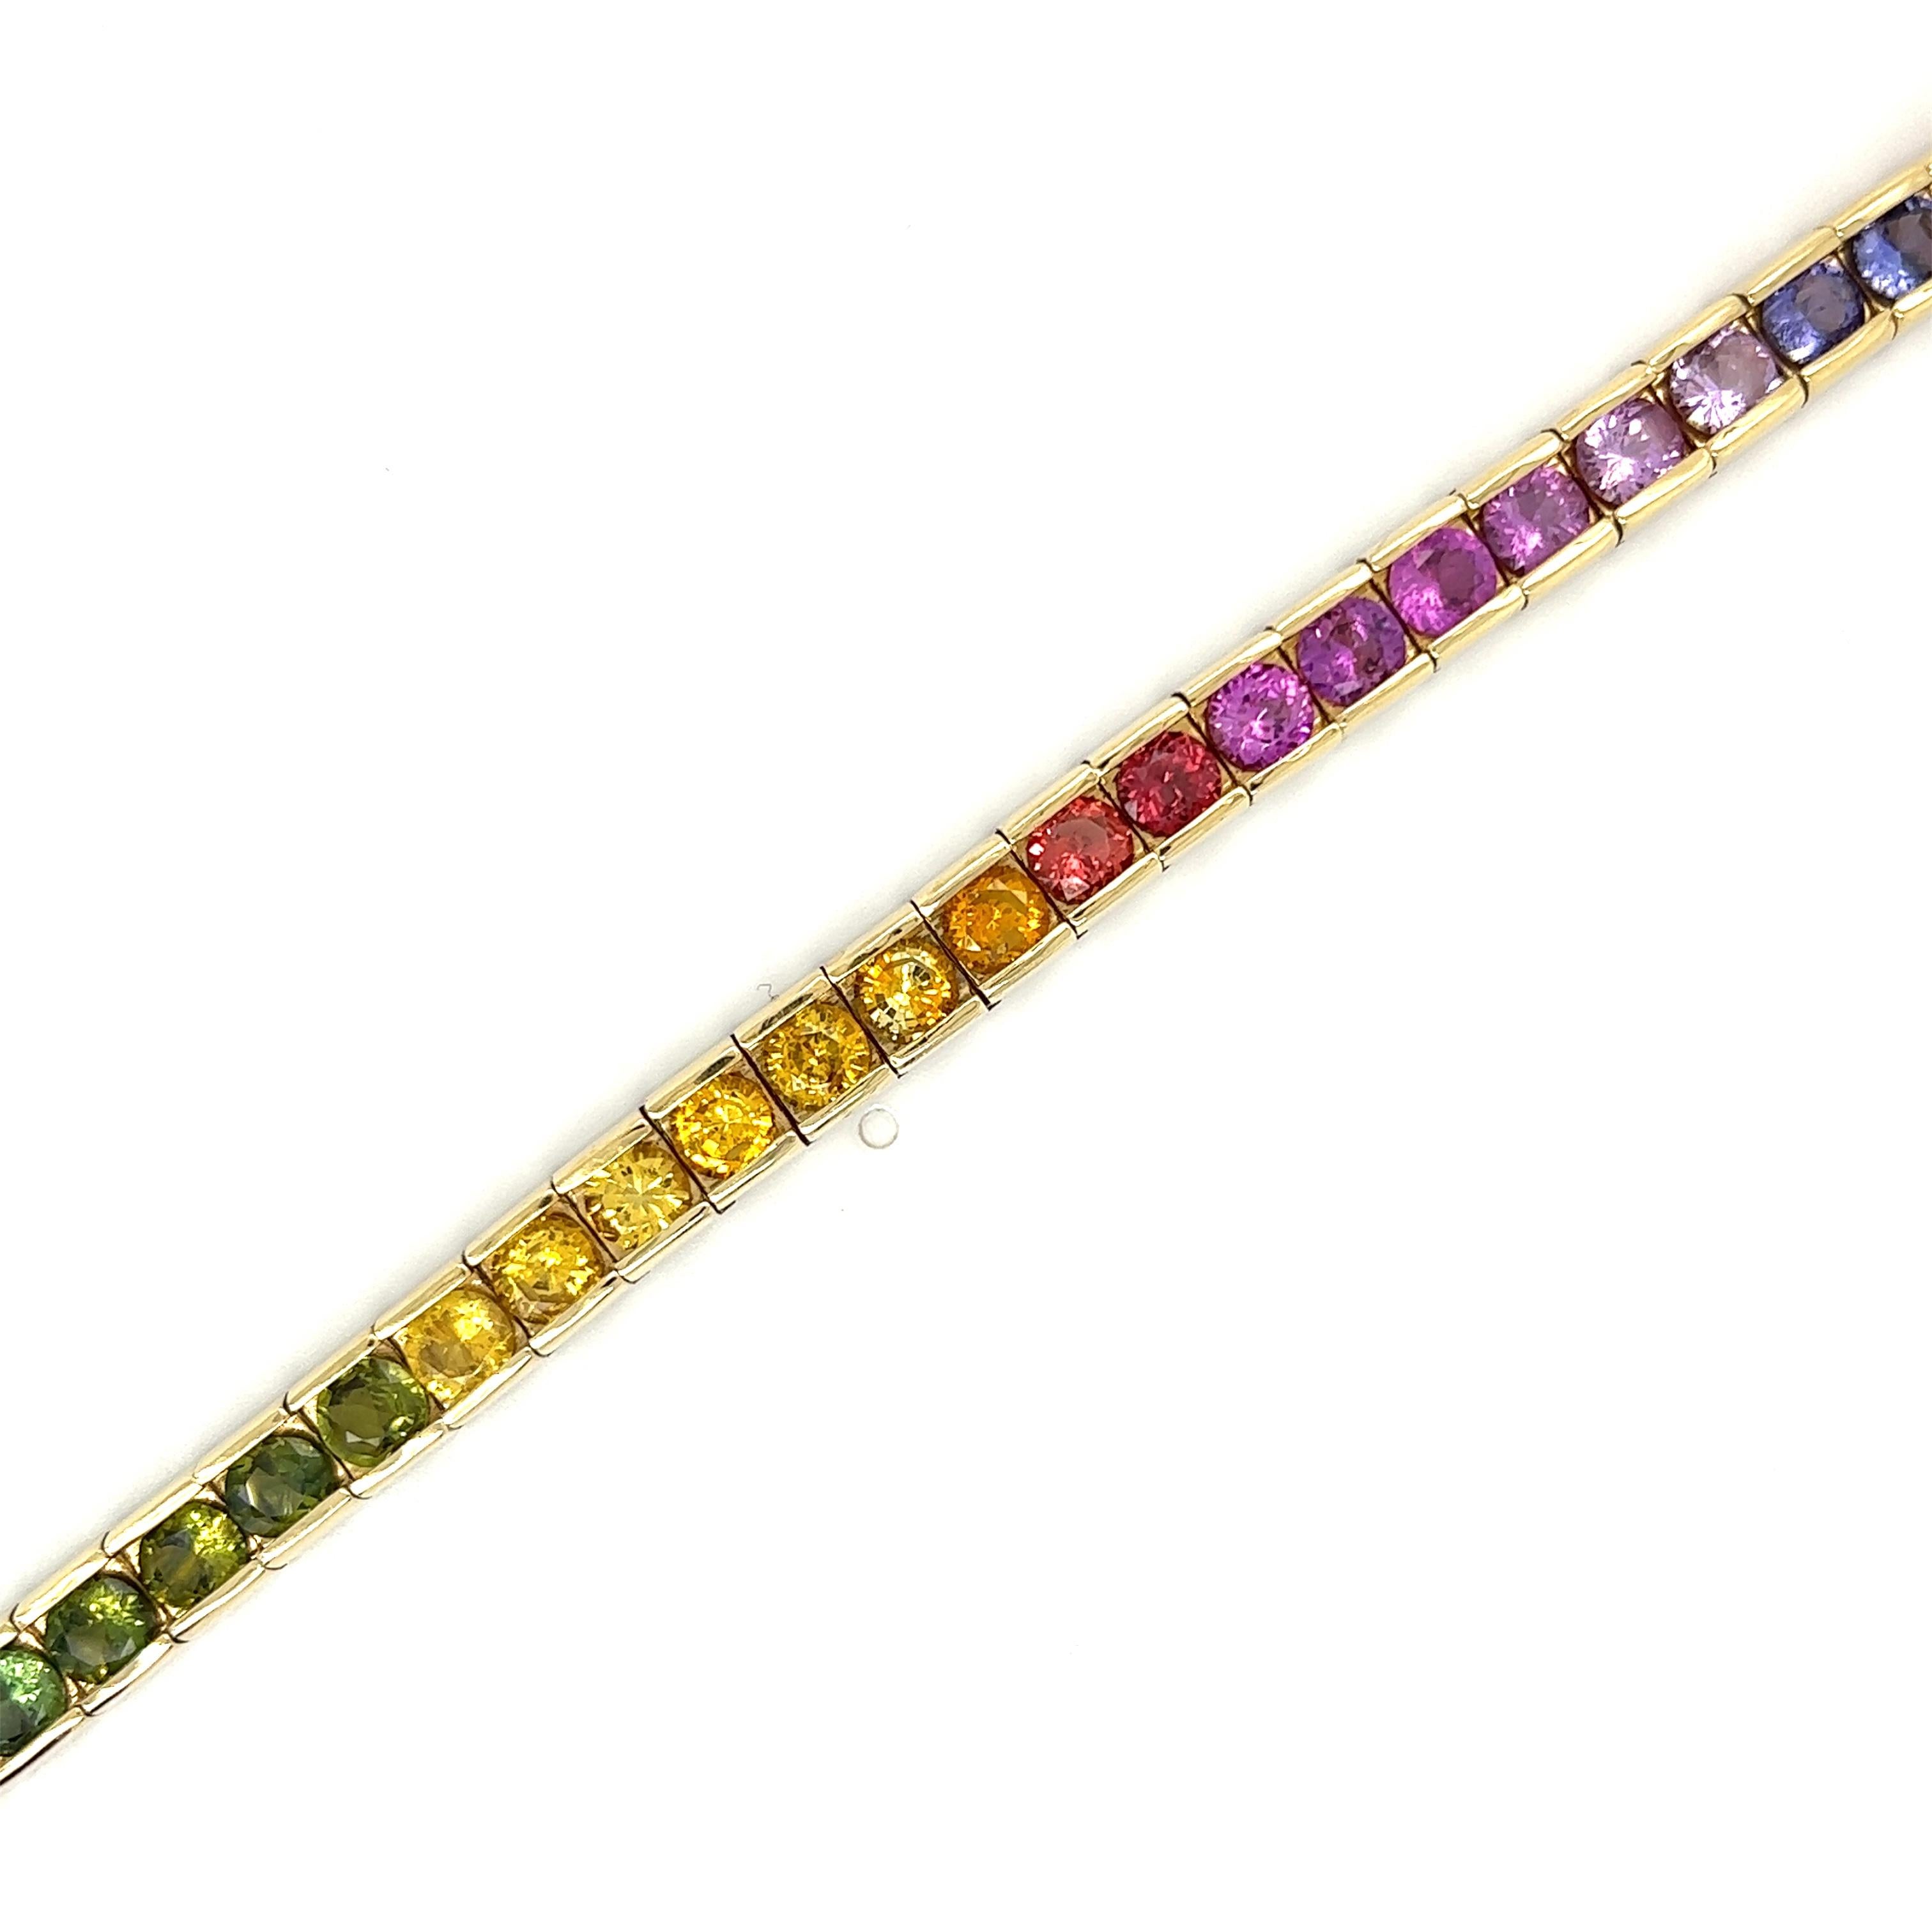 Multi-Color Rainbow Sapphire Tennis Bracelet. Individual Channel Setting. 

Details:

34- Round Sapphire's- 18.80ct Total Weight- Multi-Color
14kt Yellow Gold
